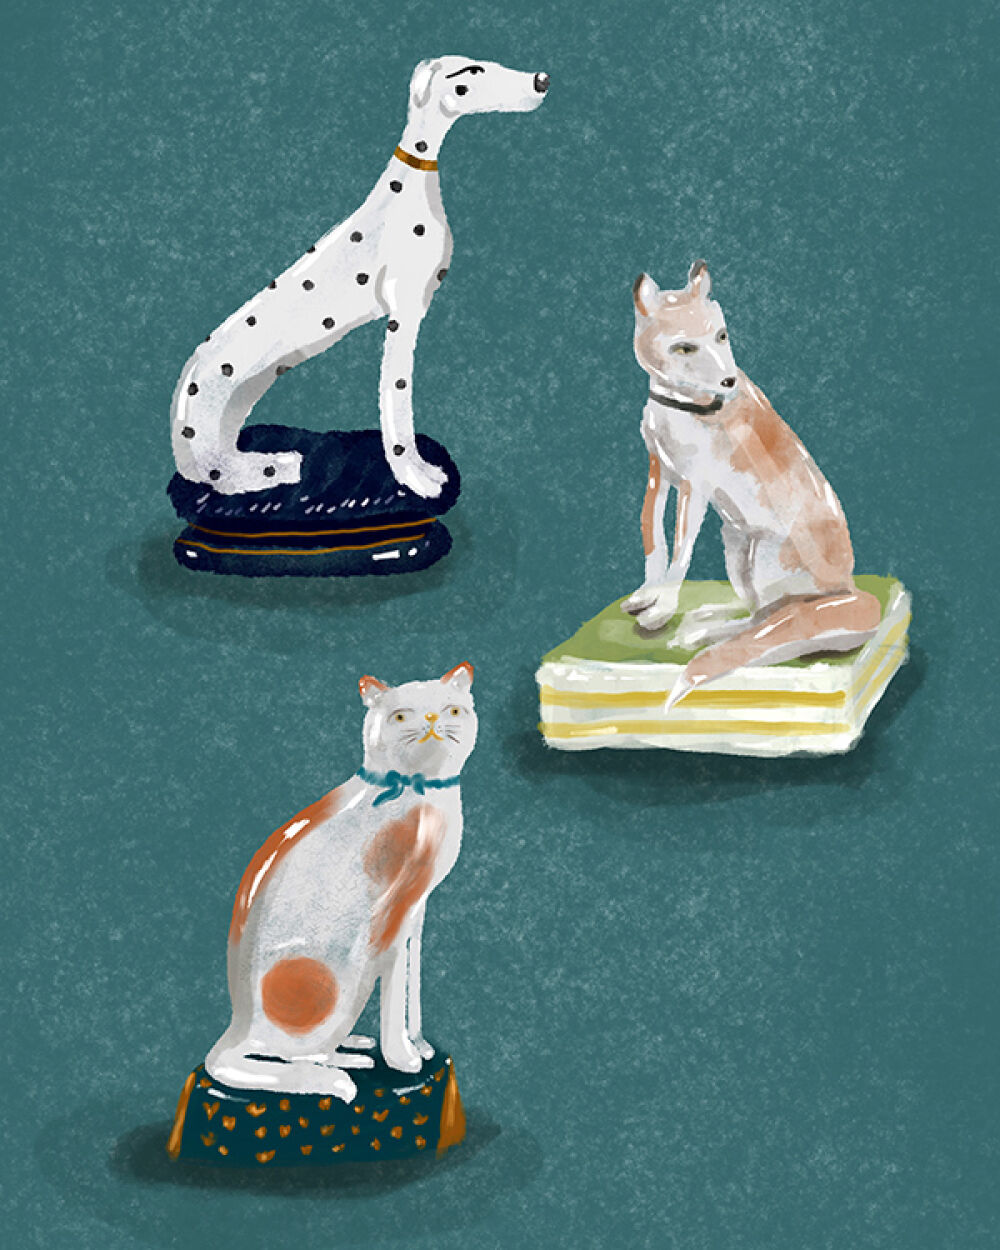 Objects and iconic dogs illustrated by Canadian digital artist Christina Gliha